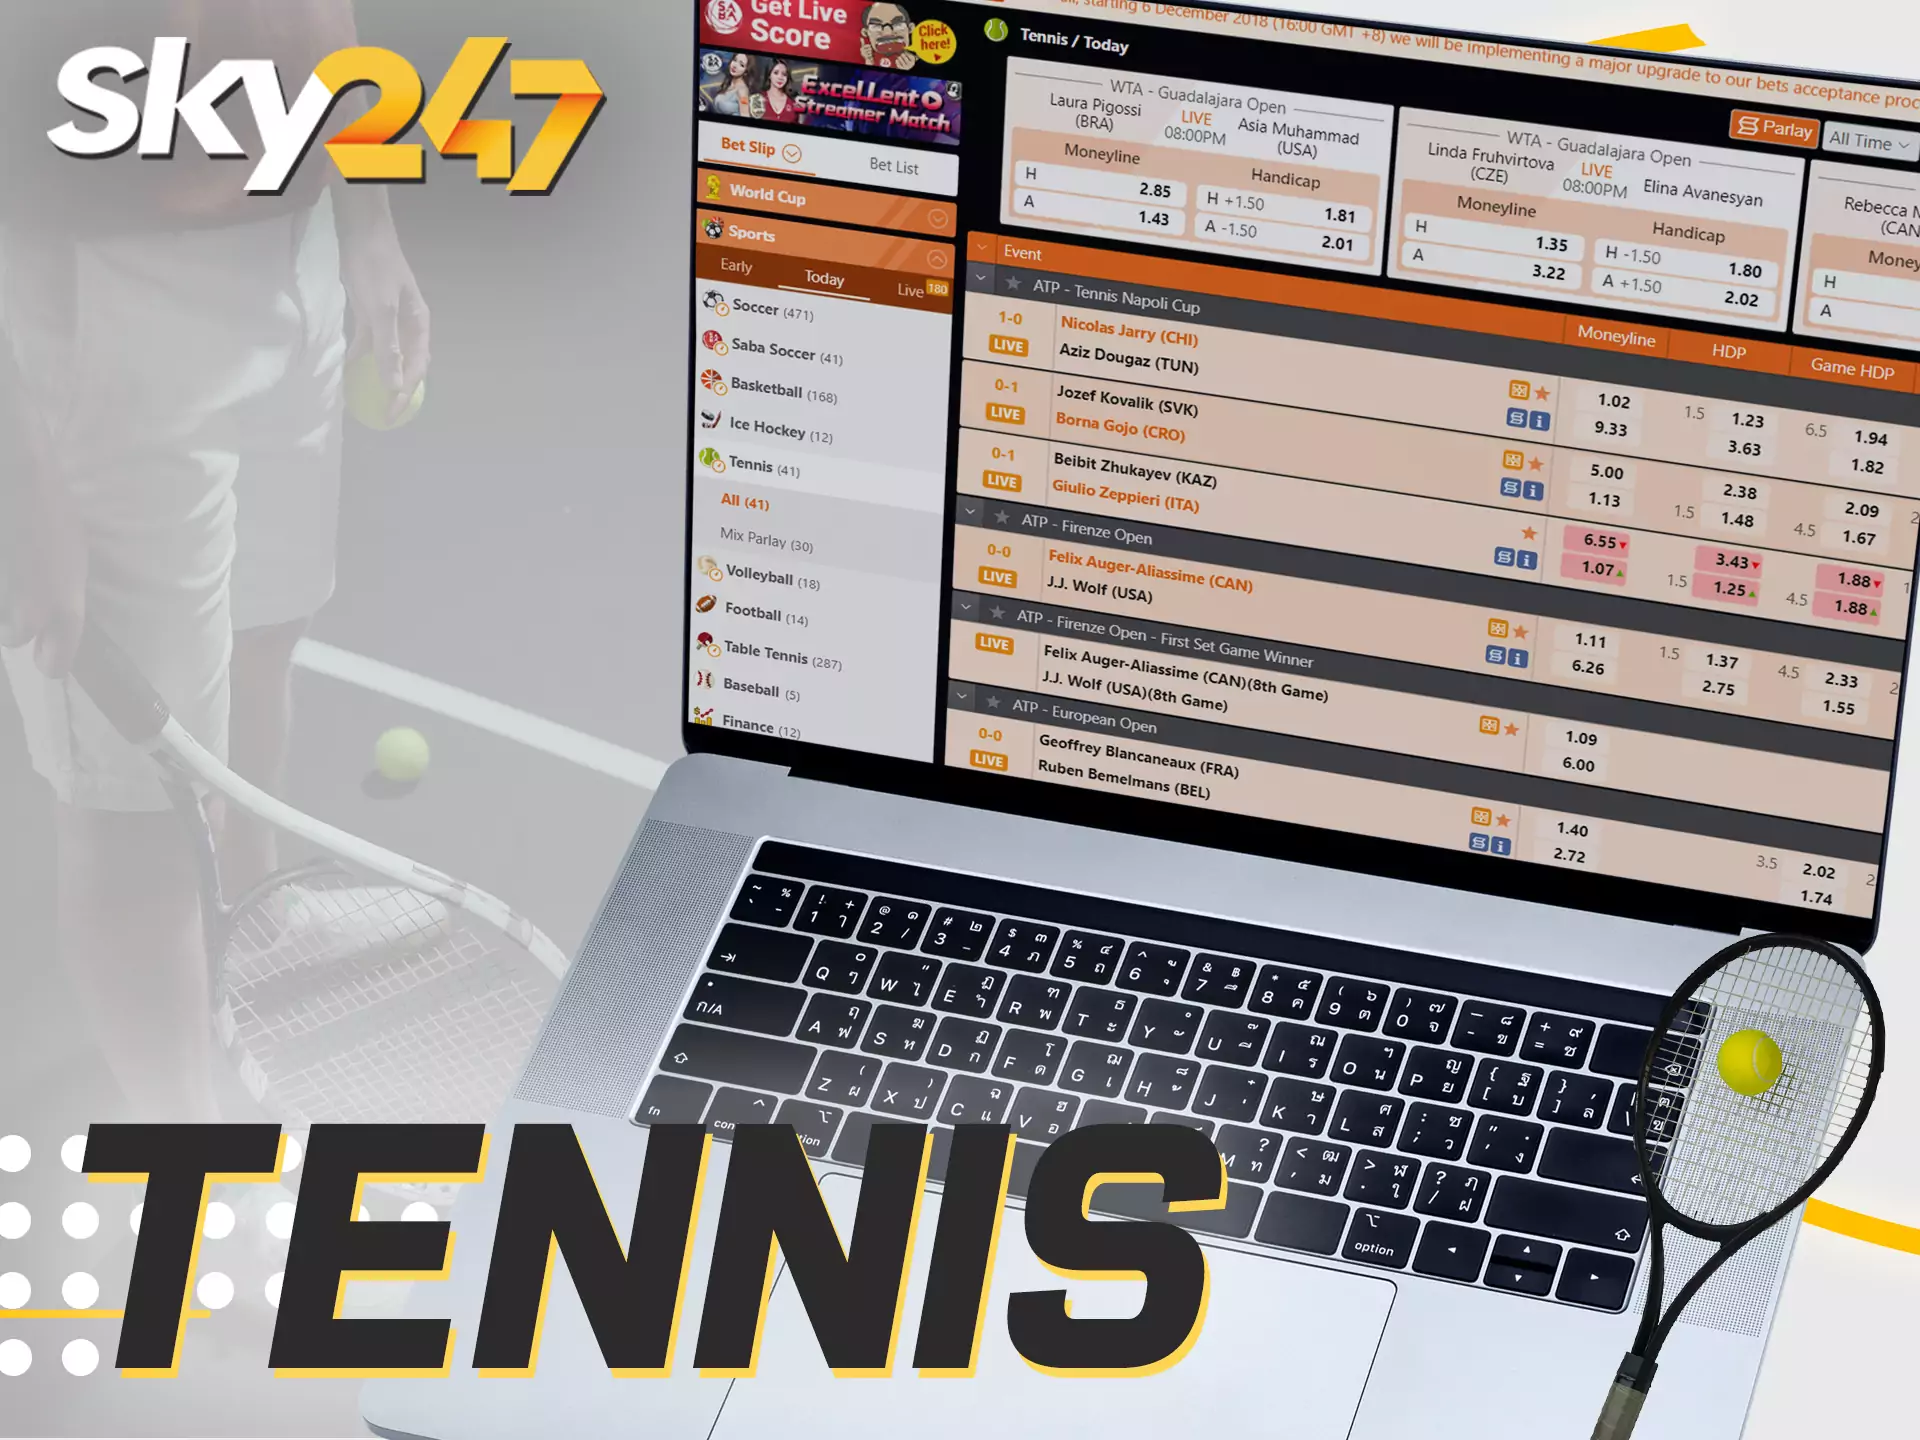 Place bets on tennis events on the Sky247 website.